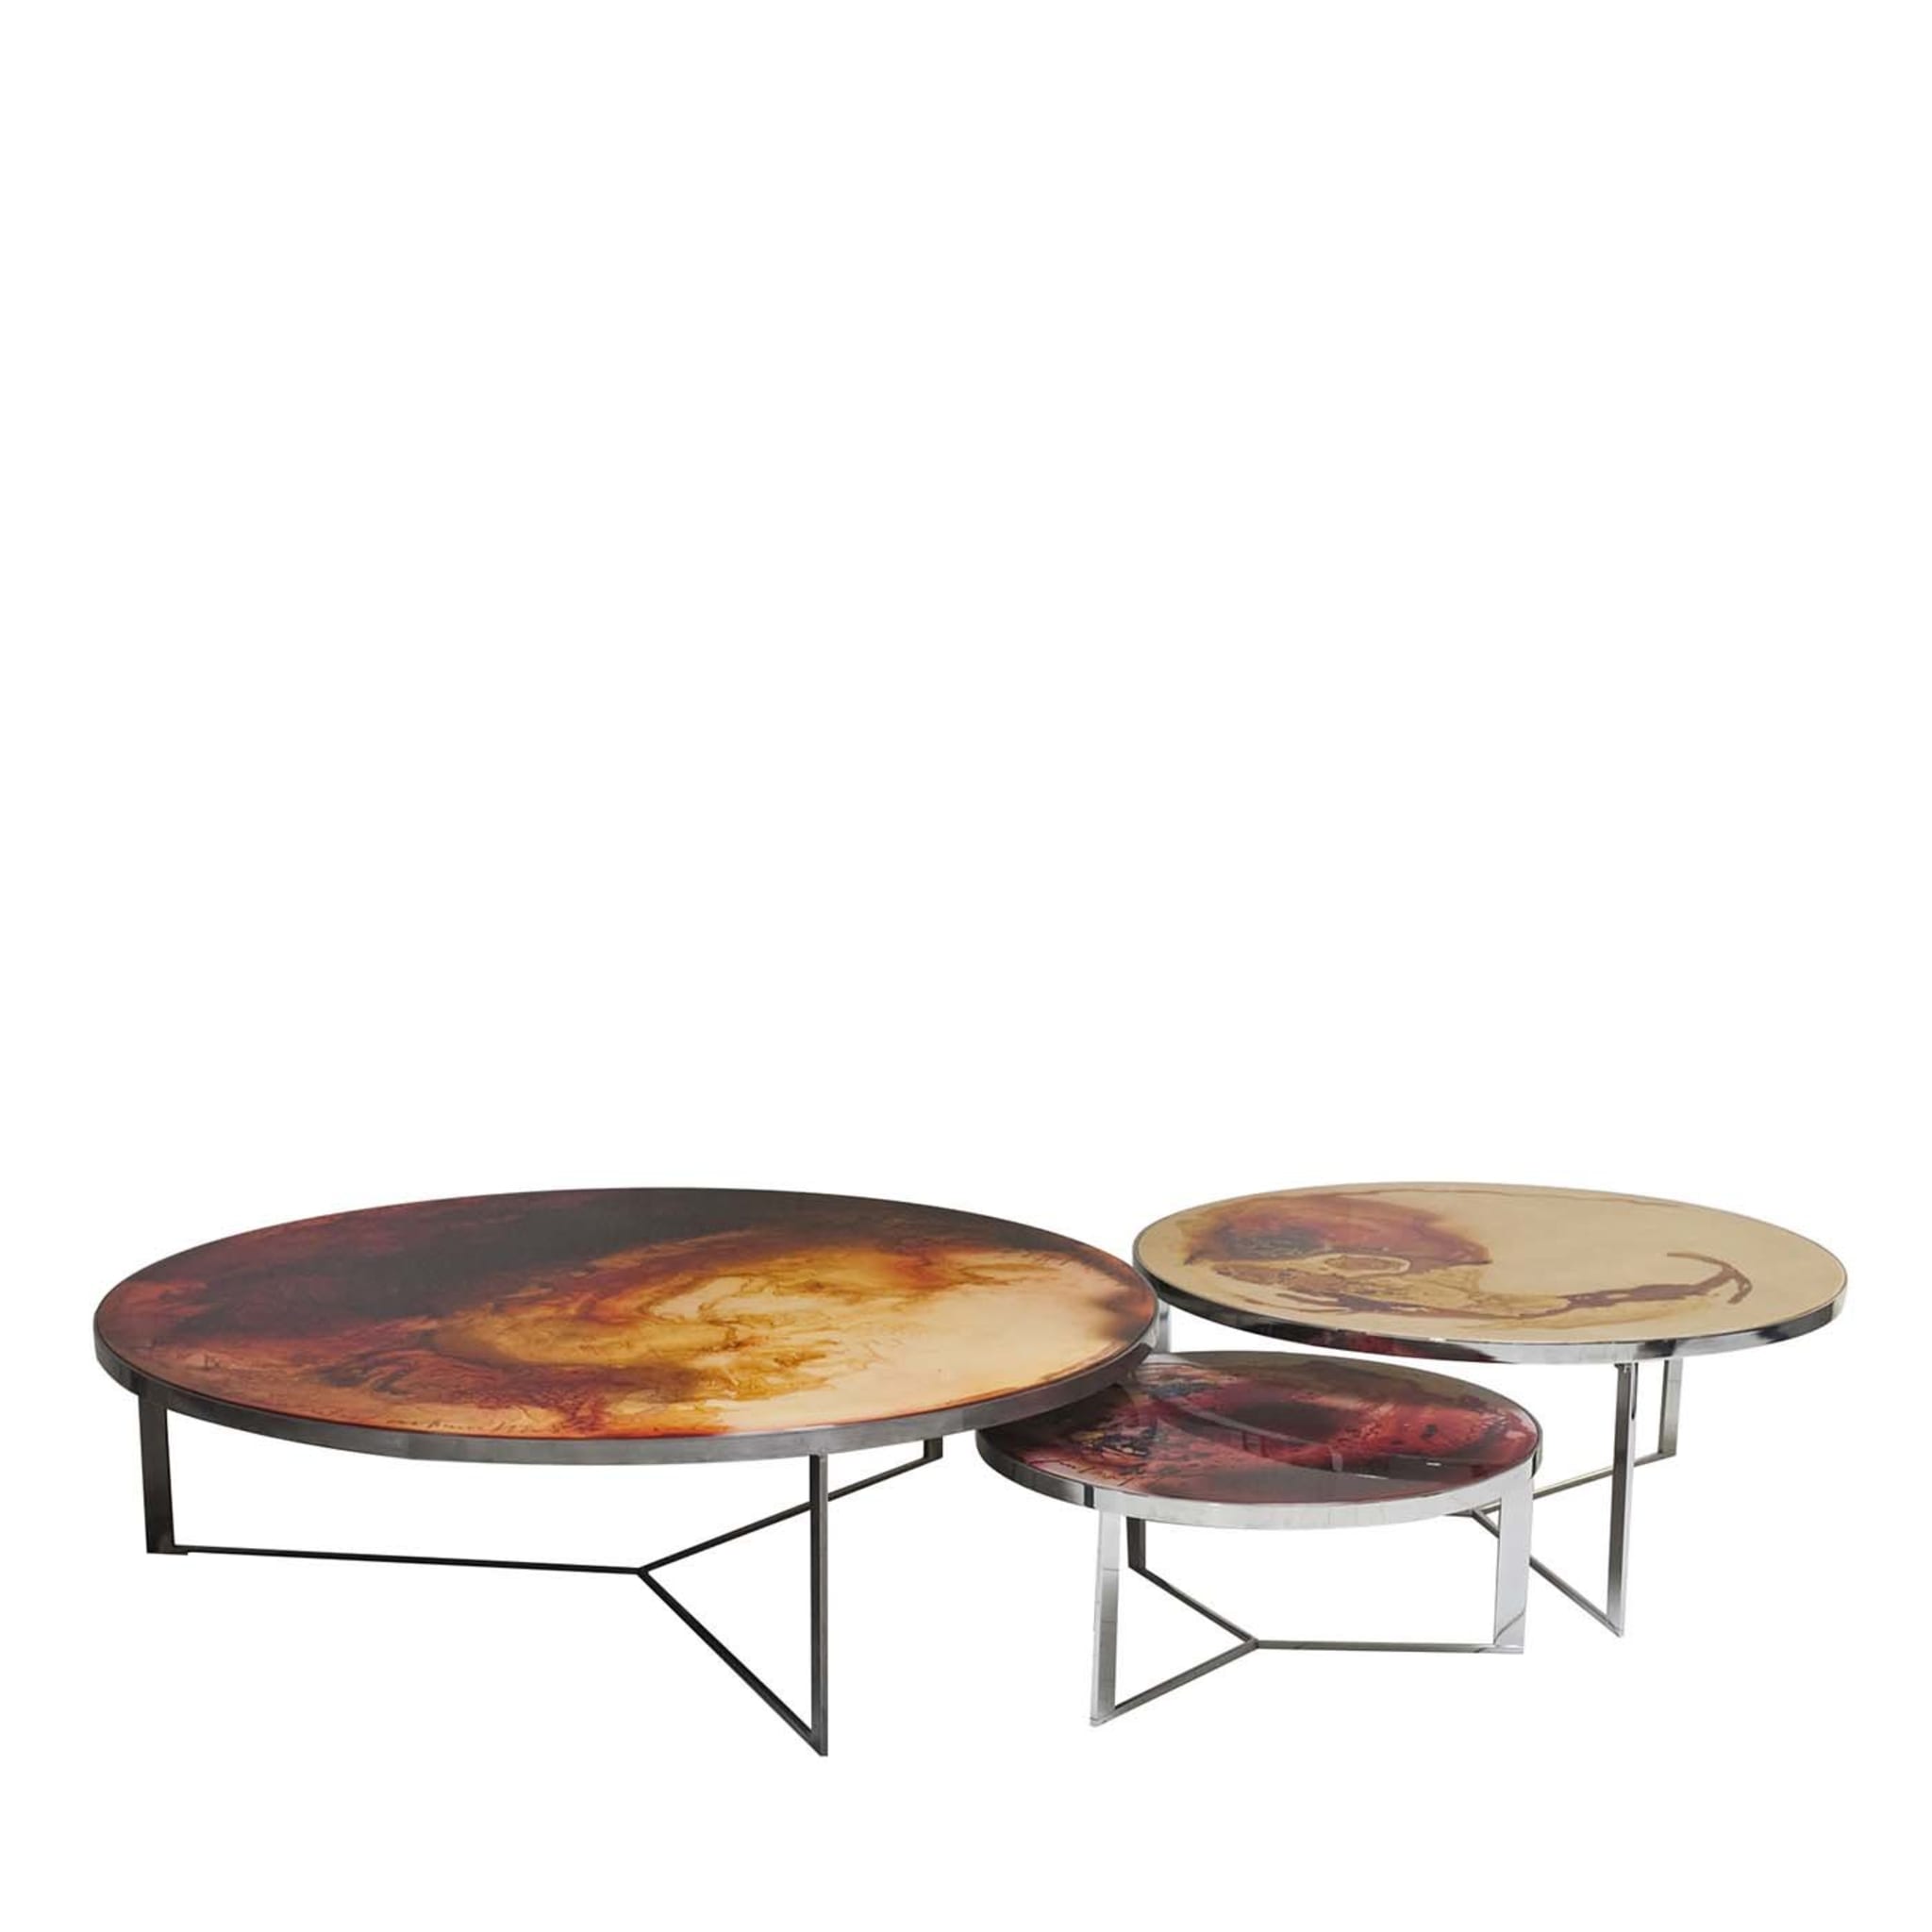 Set of 3 Handpainted Rust Coffee Tables - Main view